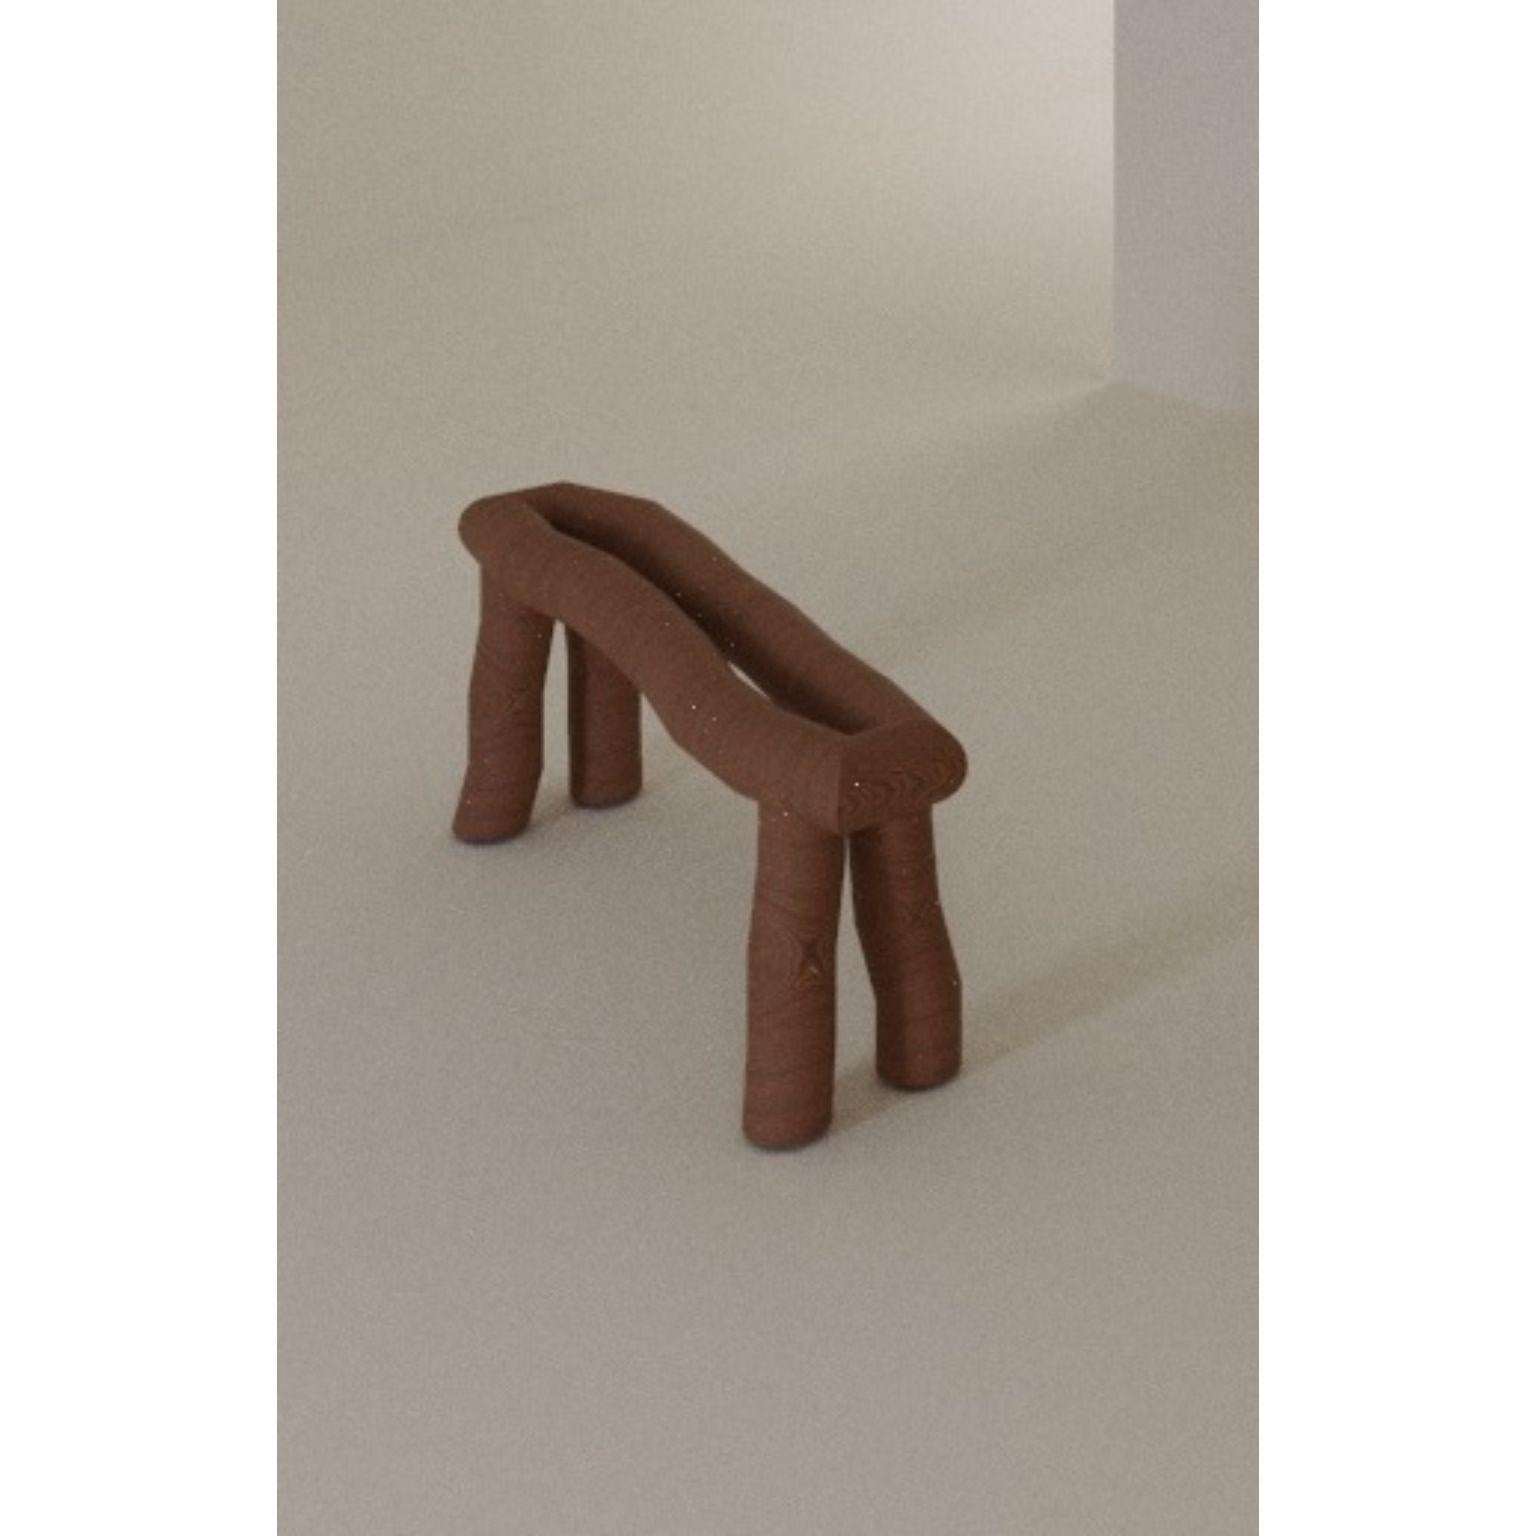 Segmento pine logs bench by Cara Davide
Dimensions: W 115 x D 28.5 x H 43 cm.
Materials: Pine logs.
Color: Light brown.
Also available in dark brown.

Segmento perceives ordinary objects in an abstracted form through the act of breaking down